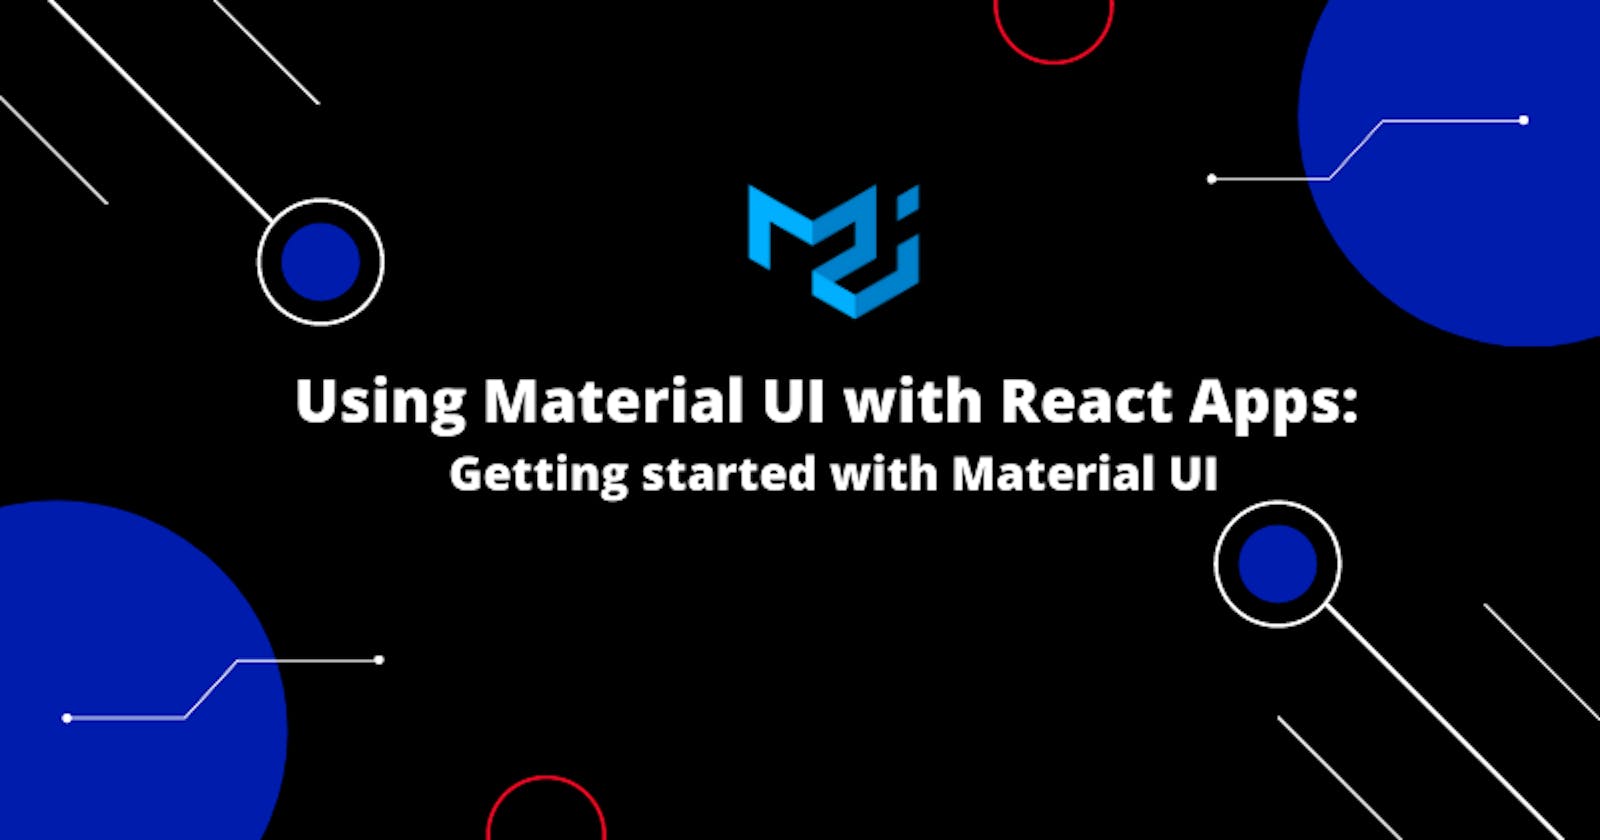 Using Material UI with React Apps: 
Getting started with Material UI